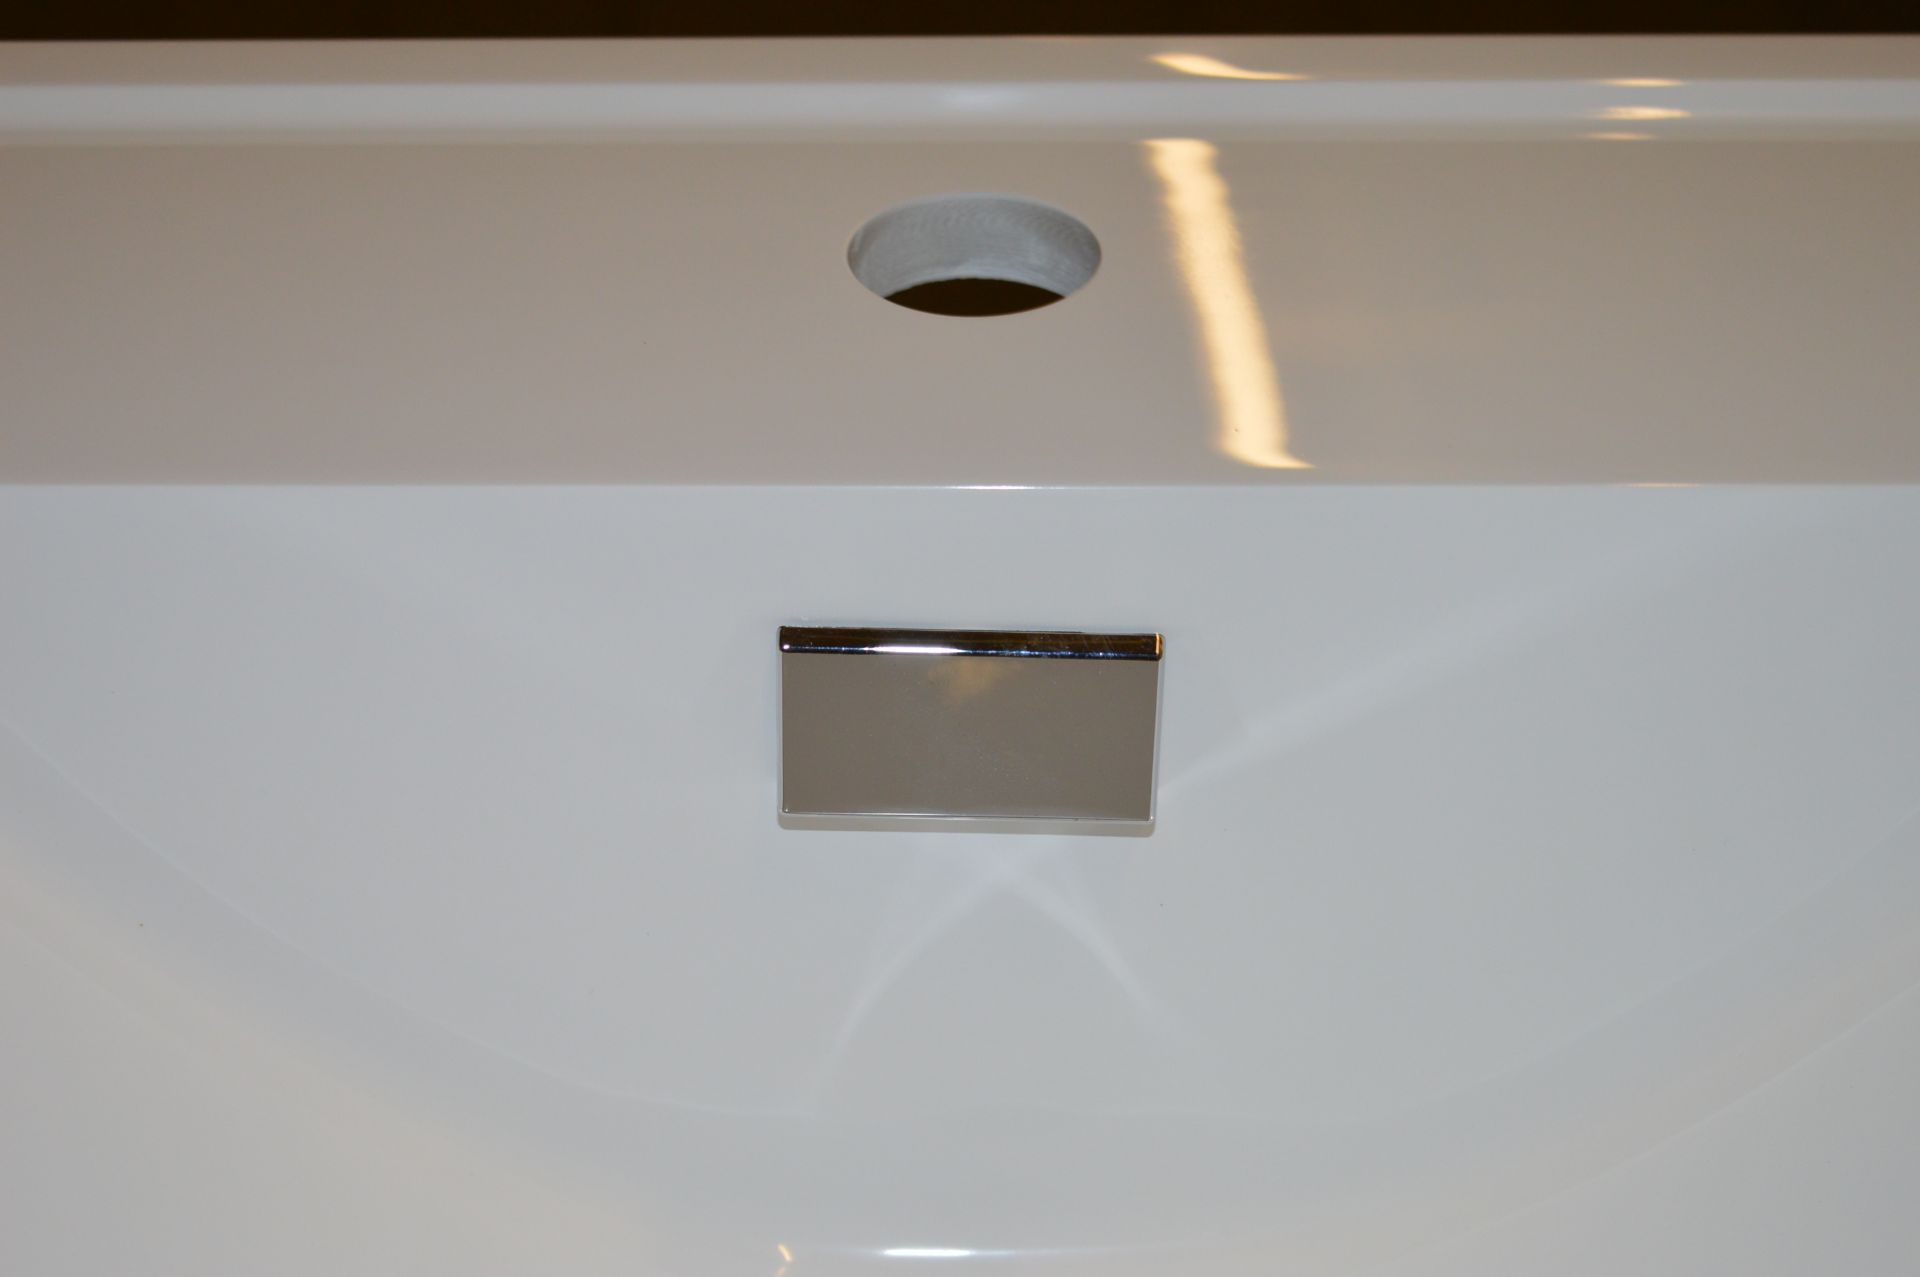 1 x Vogue Onyx White Gloss 600mm Bathroom Vanity Unit With Wash Basin - Vinyl Wrap Coating for - Image 5 of 11